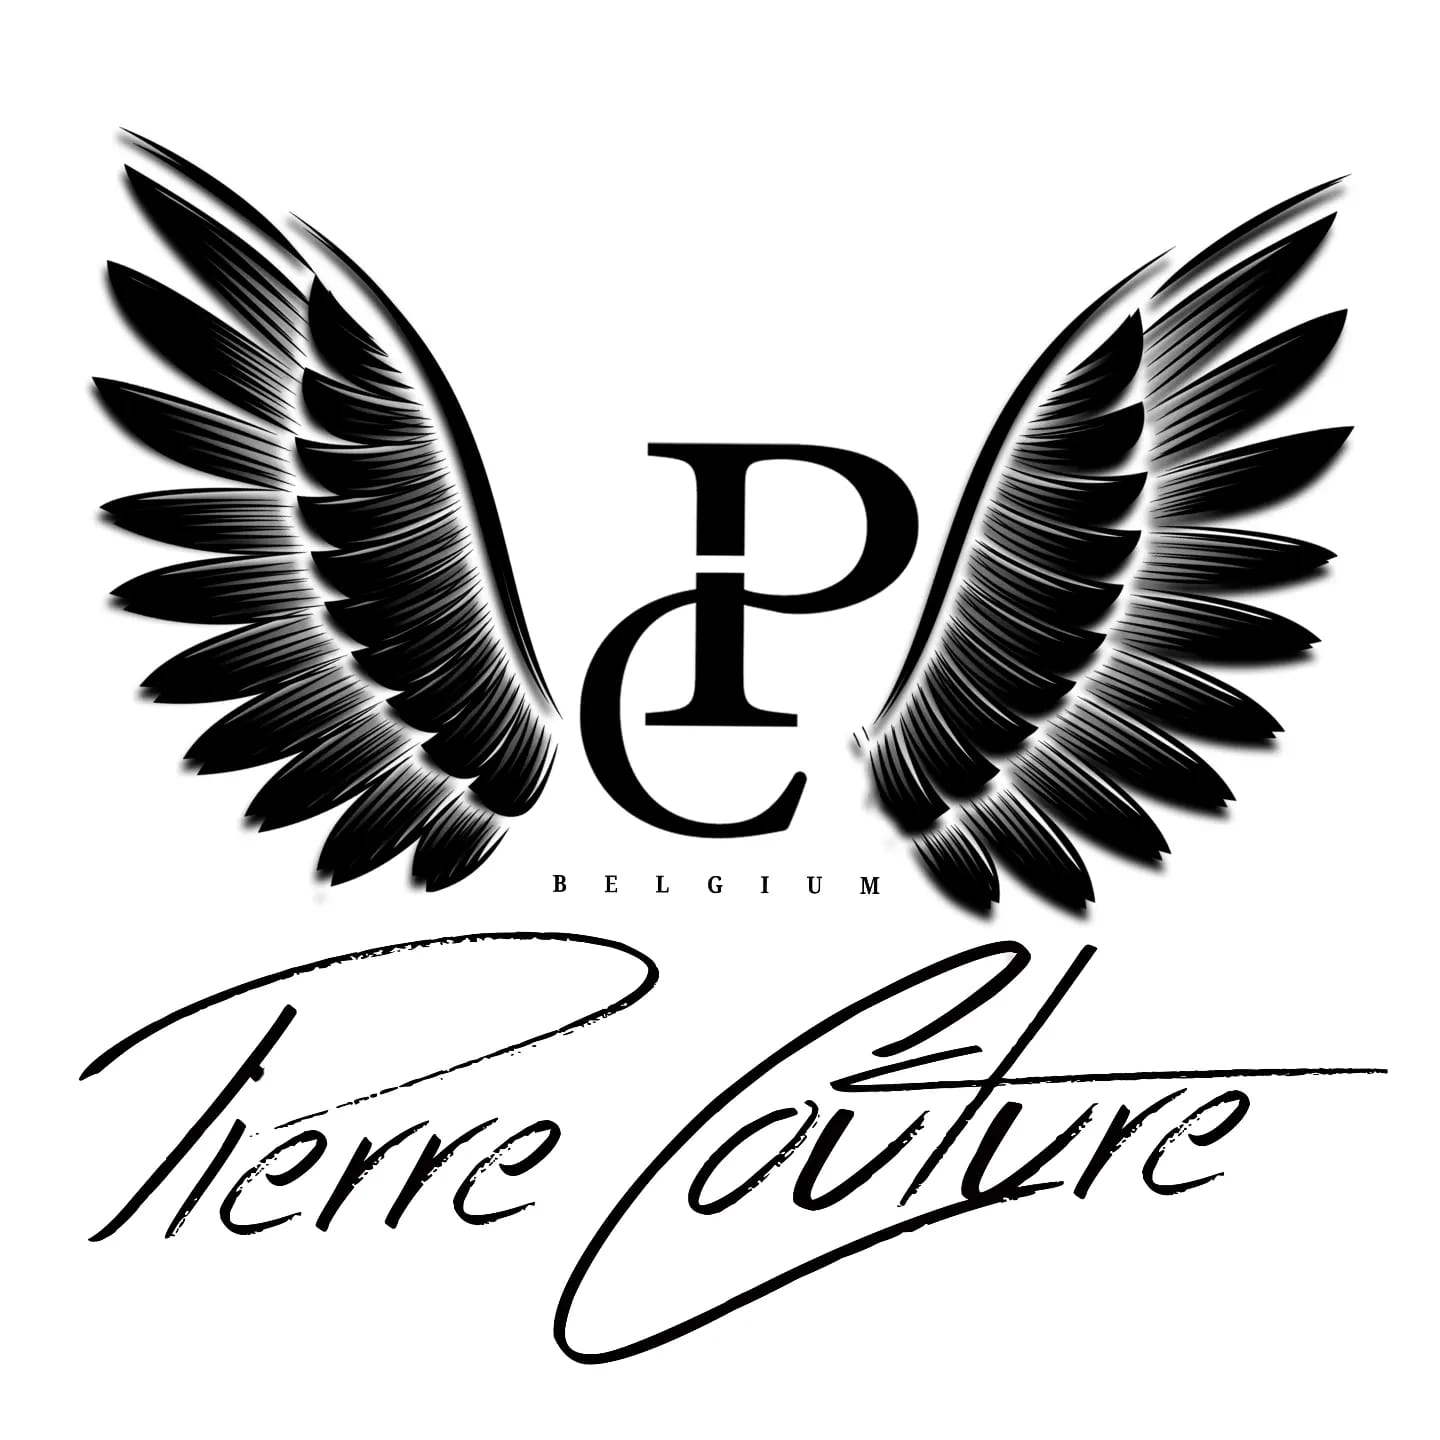 PIERRE COUTURE